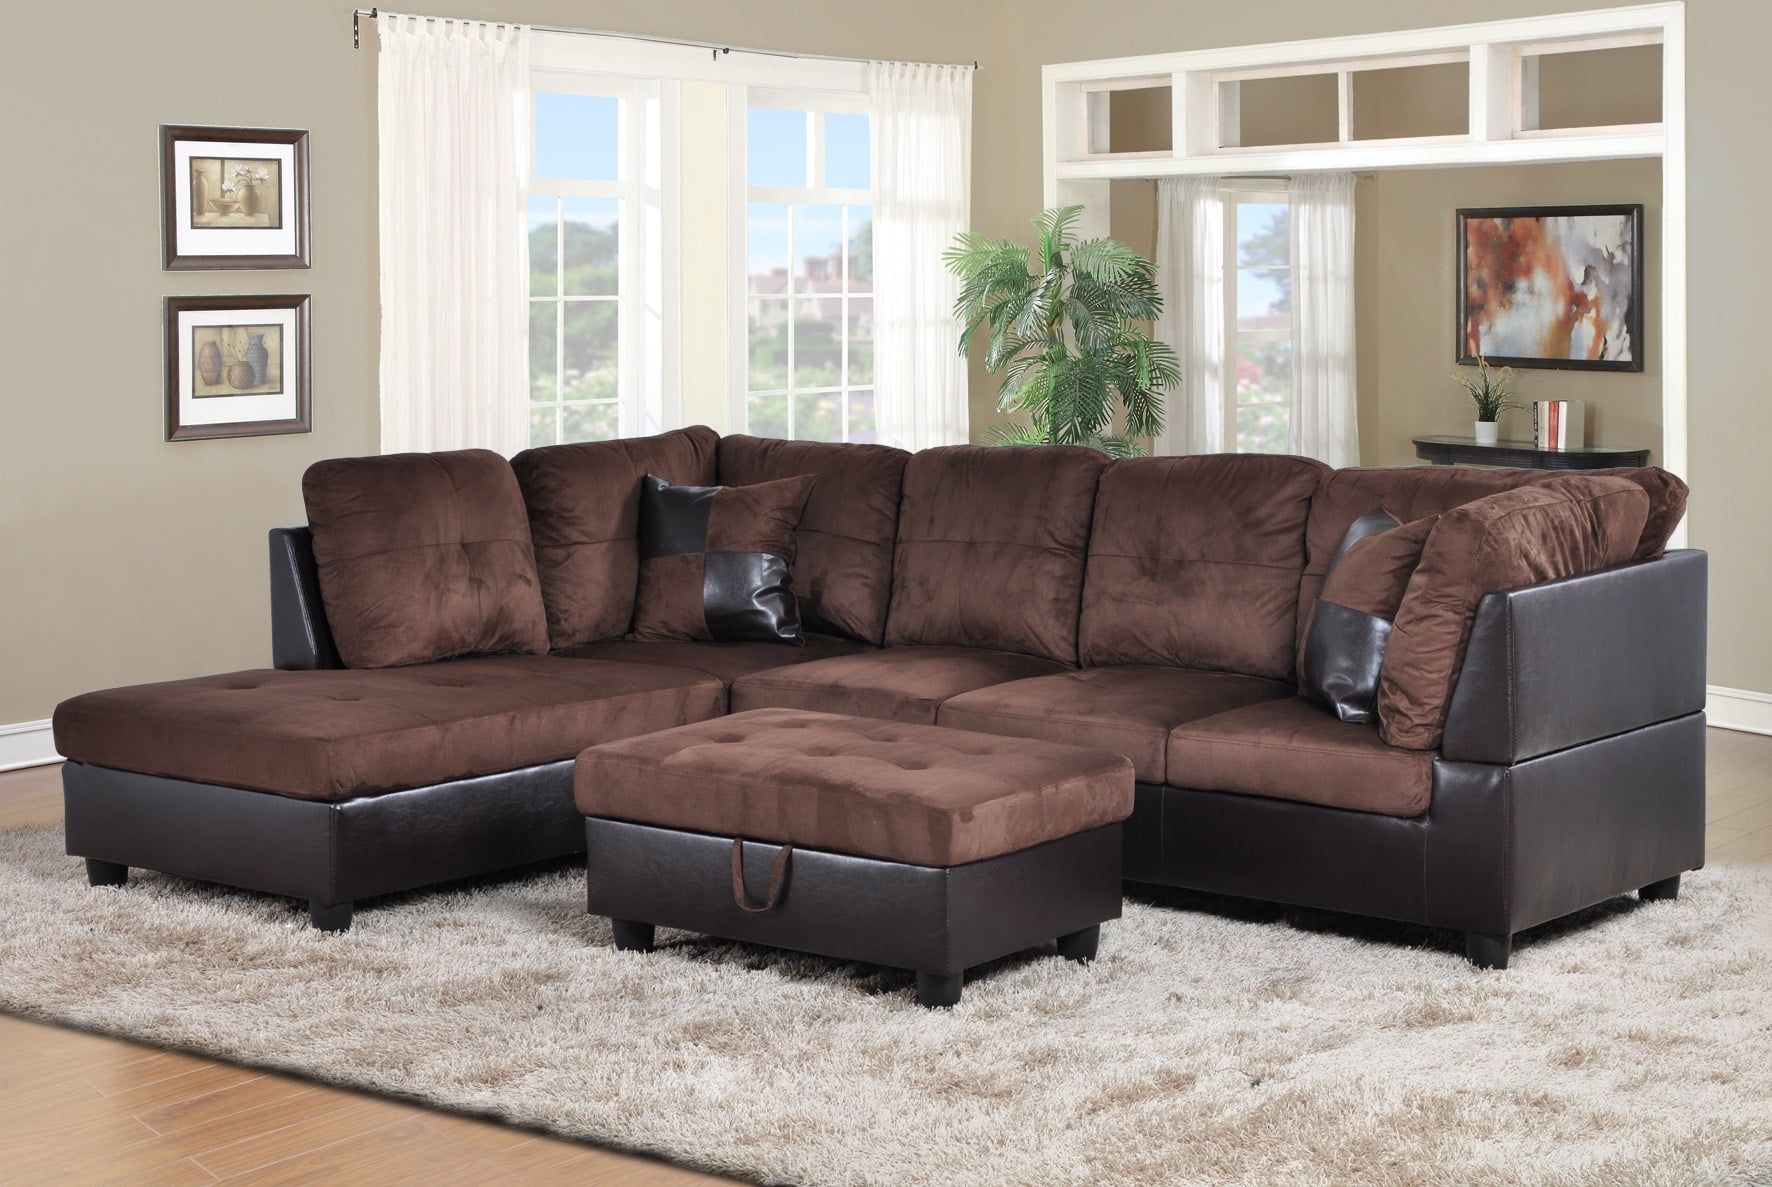 Ponliving Furniture Hermann Left Chaise Sectional Sofa With Storage Throughout Sofas In Chocolate Brown (View 12 of 20)